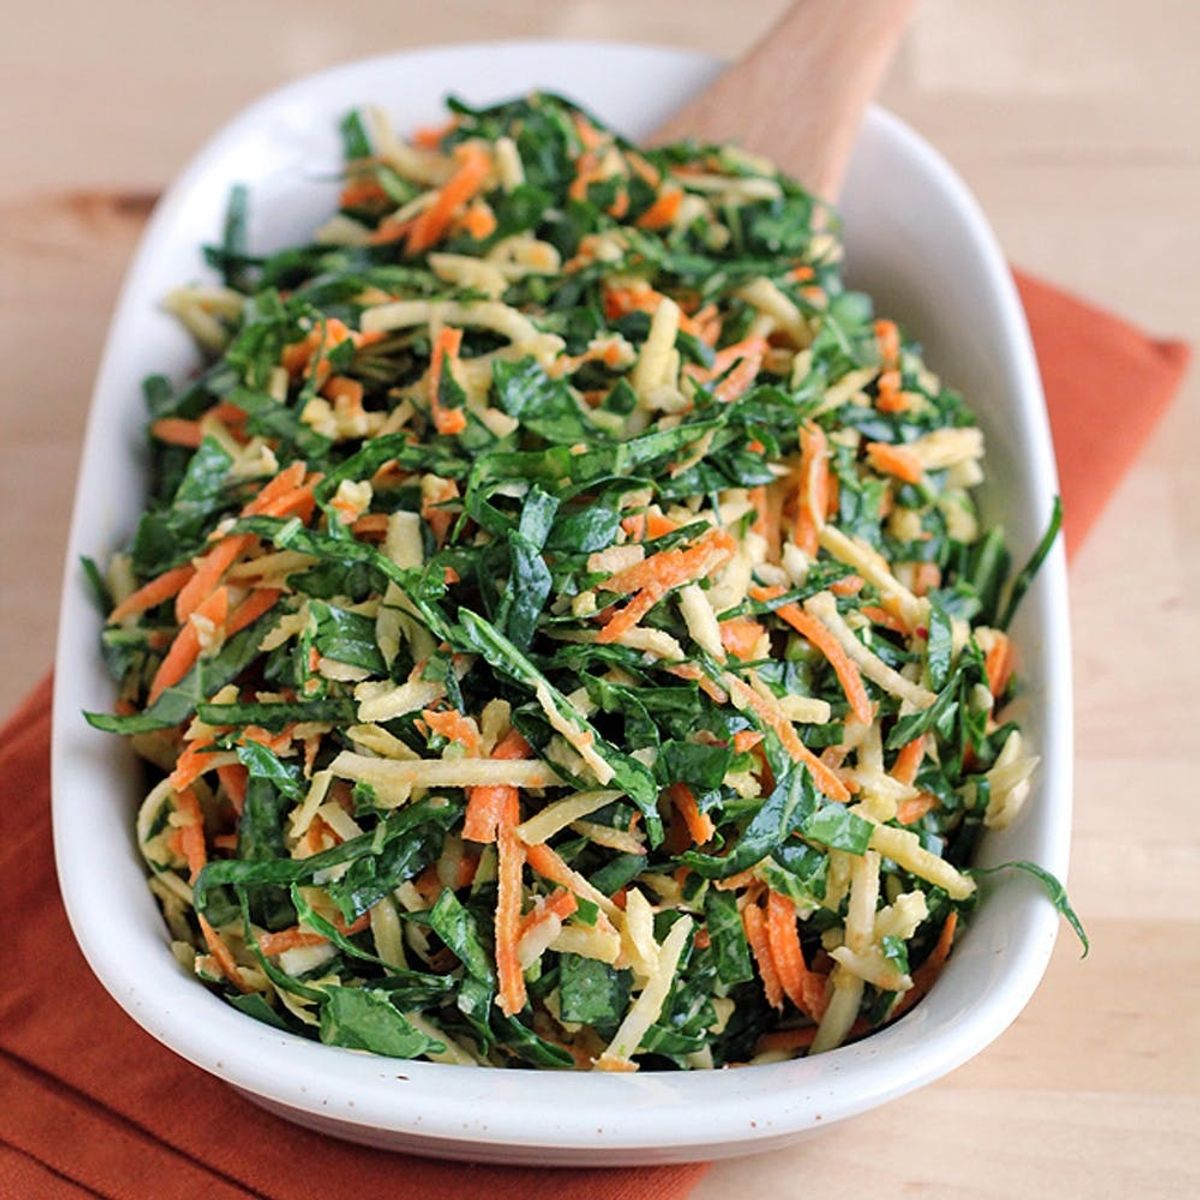 What Do I Make With That? 7 Ways to Get Creative With Collard Greens